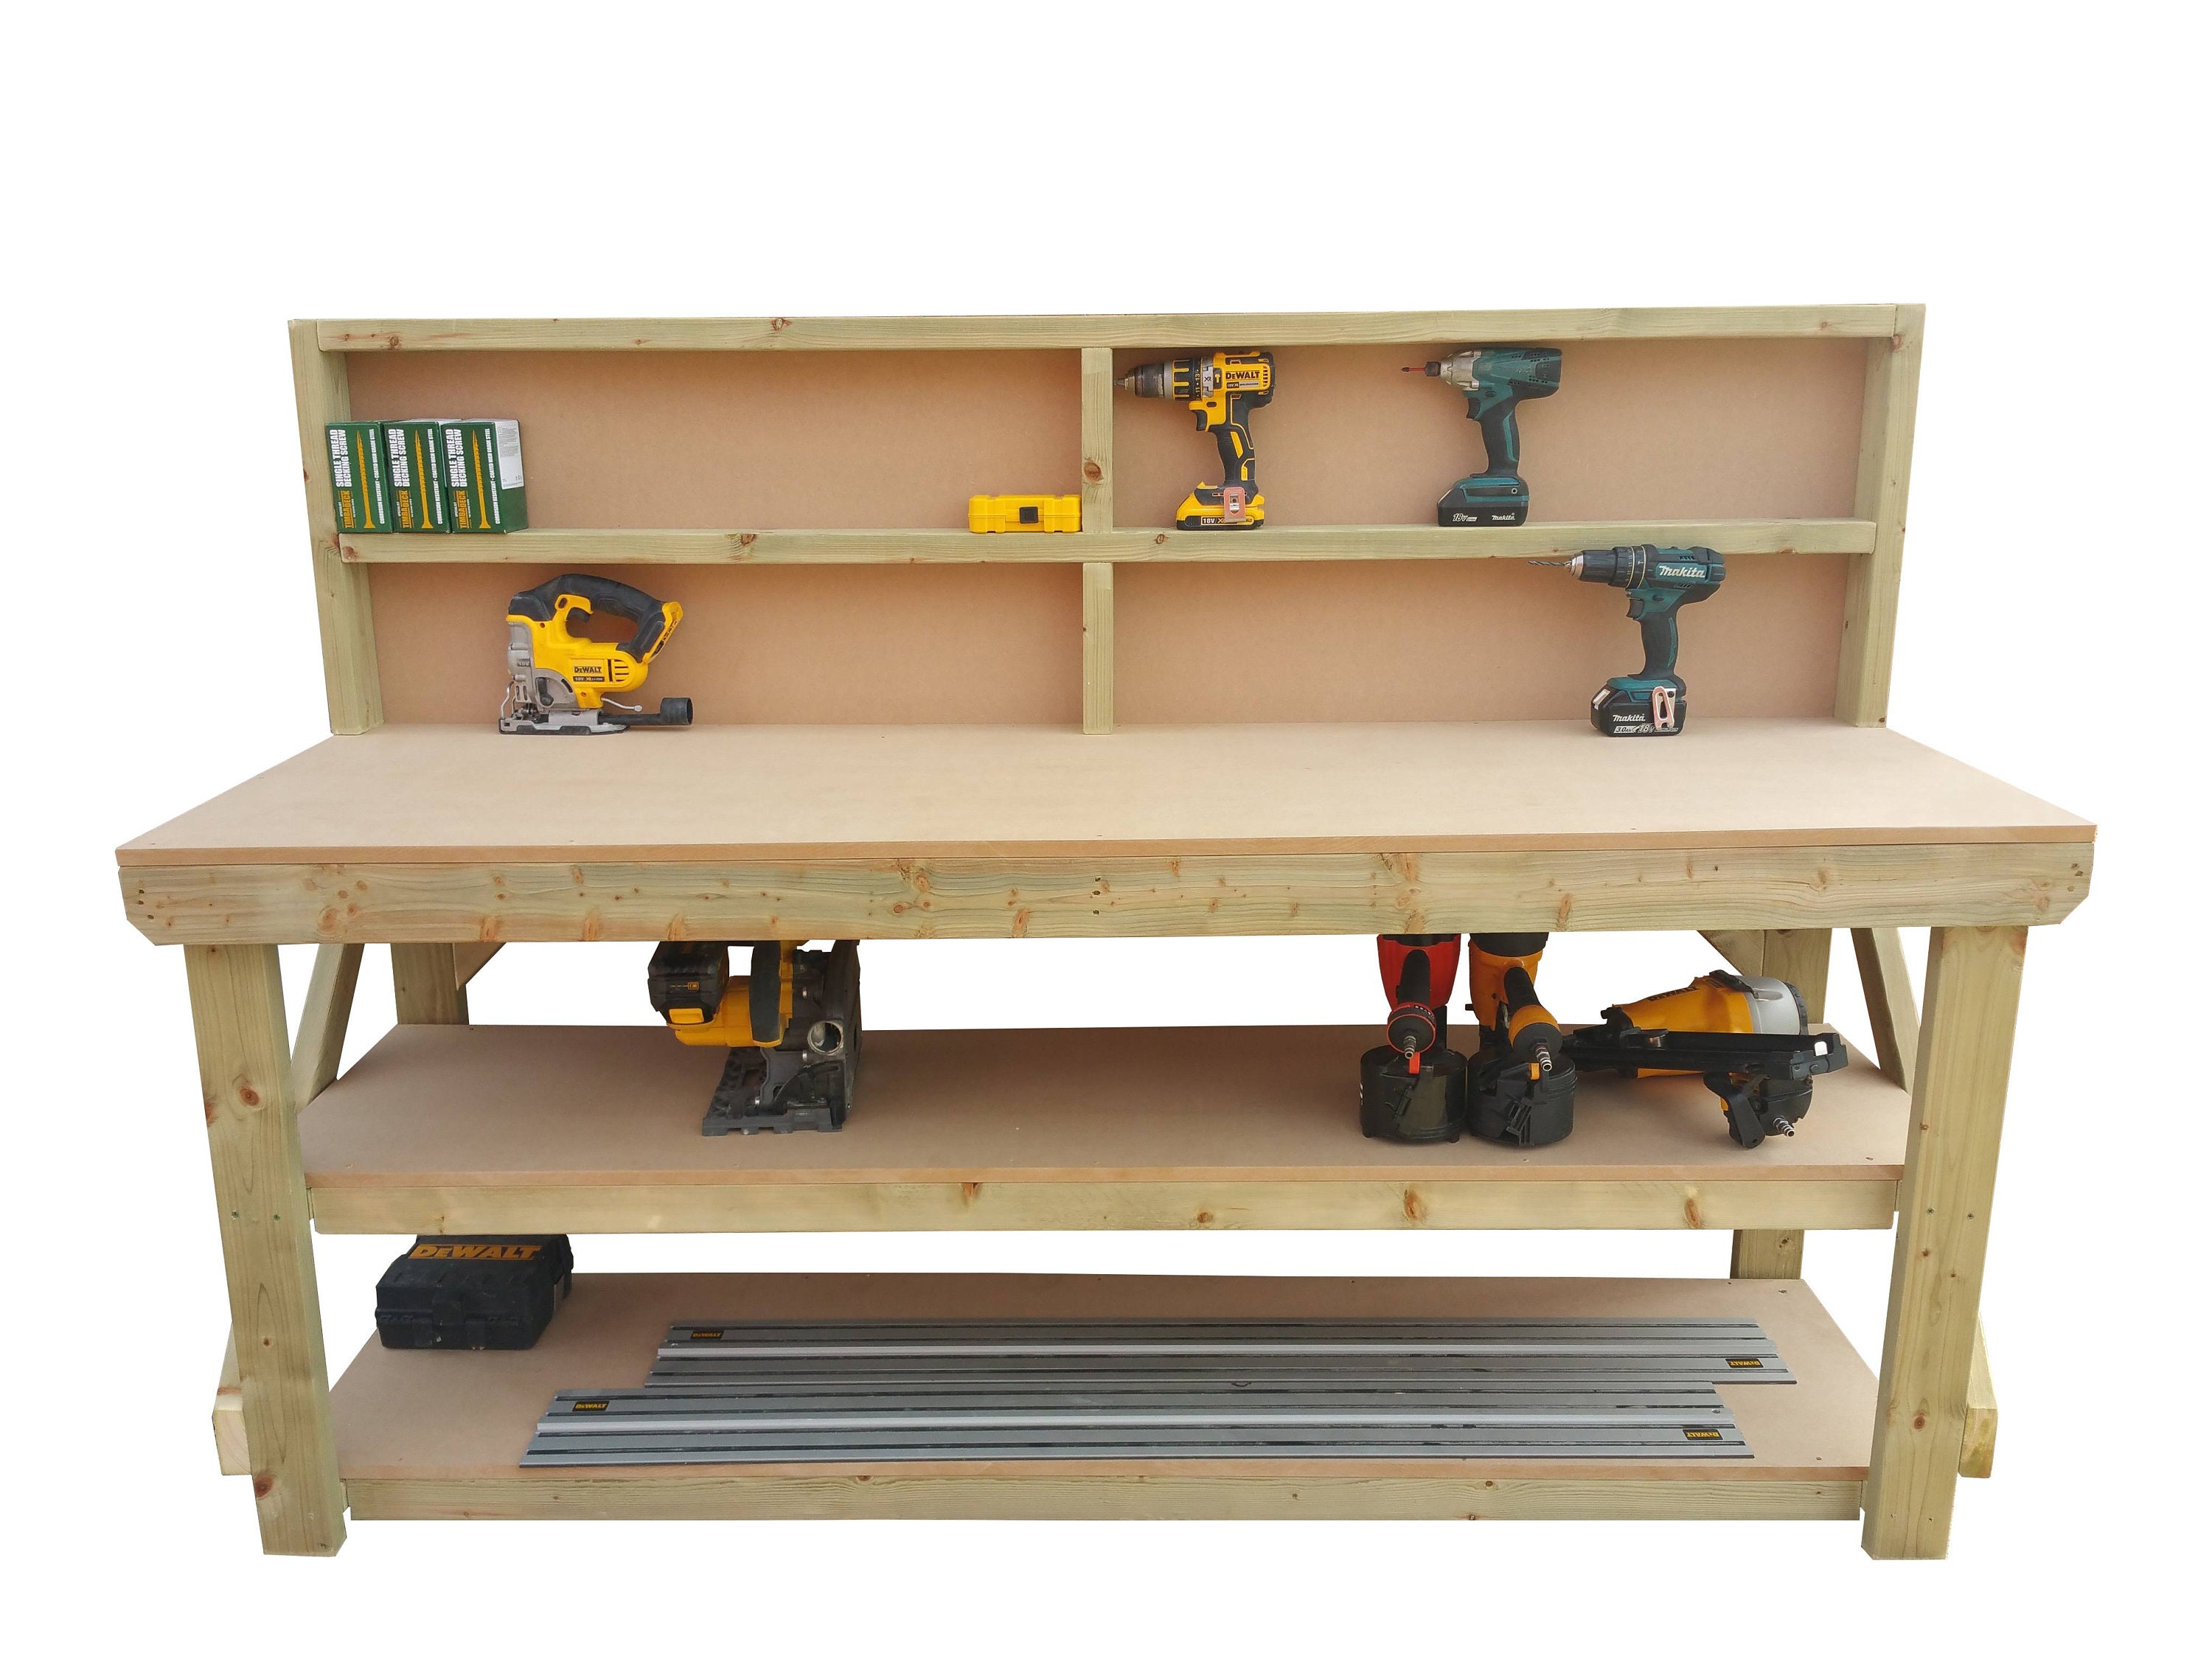 18mm MDF TOP New Wooden Heavy Duty Work Bench/table/desk 4FT HAND MADEIN THE UK 